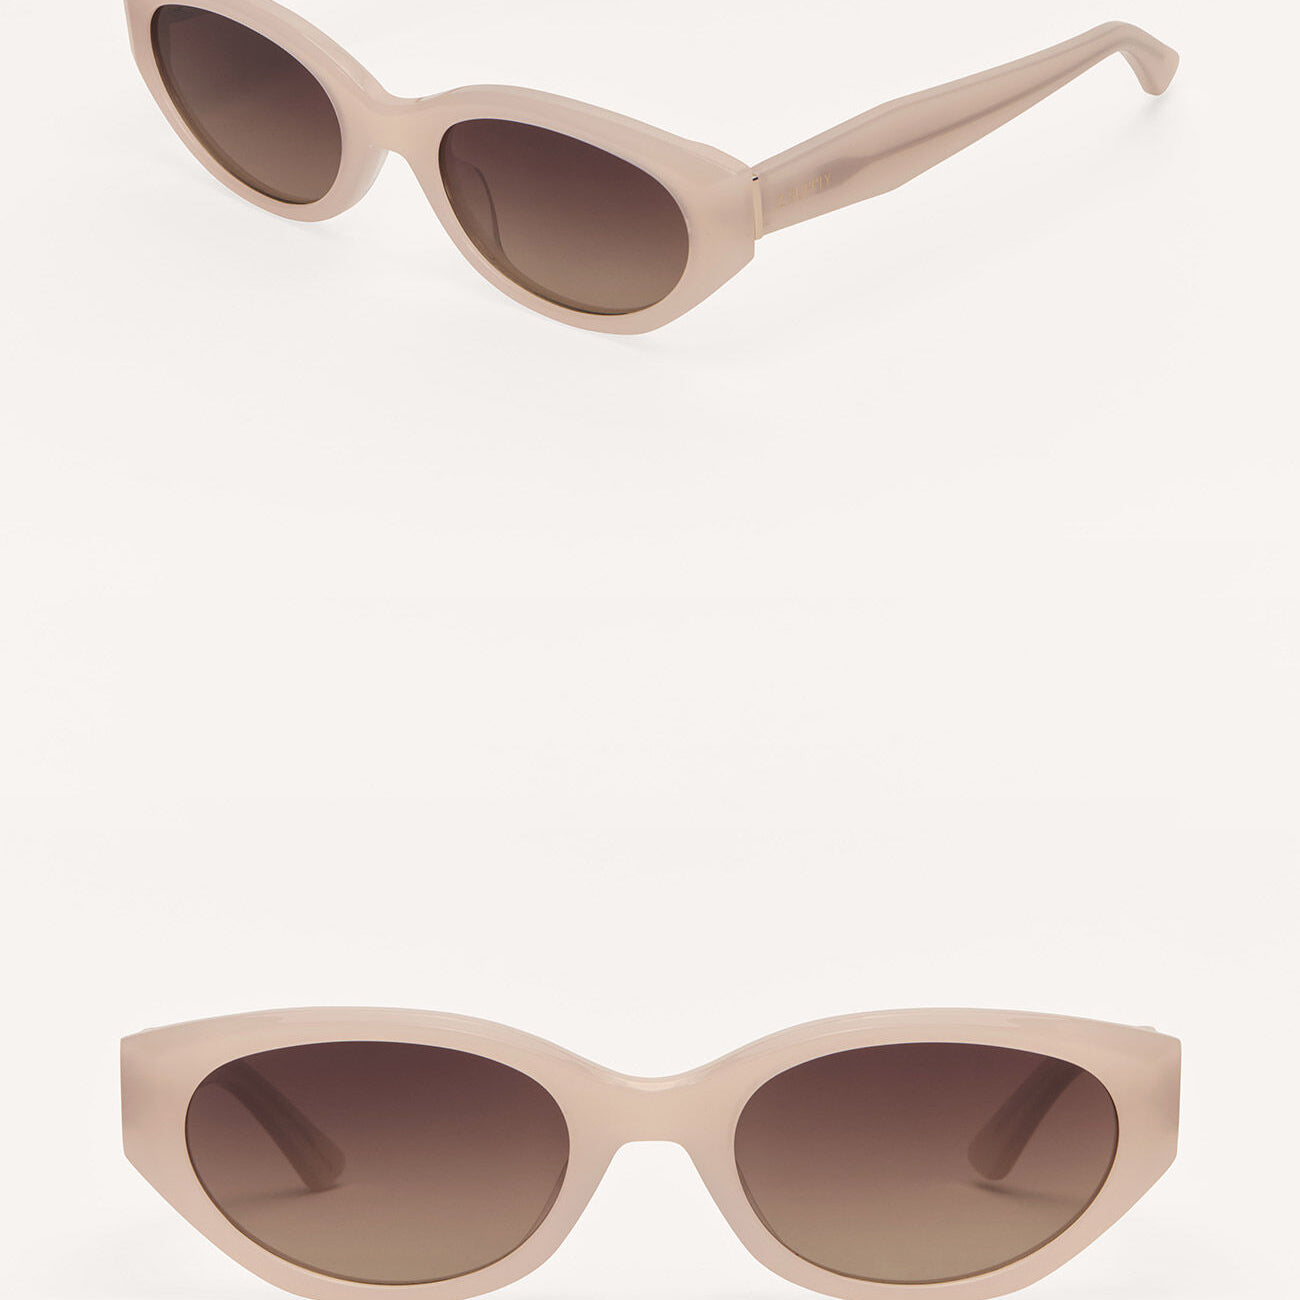 Heatwave Sunnies-Eyewear-Vixen Collection, Day Spa and Women's Boutique Located in Seattle, Washington